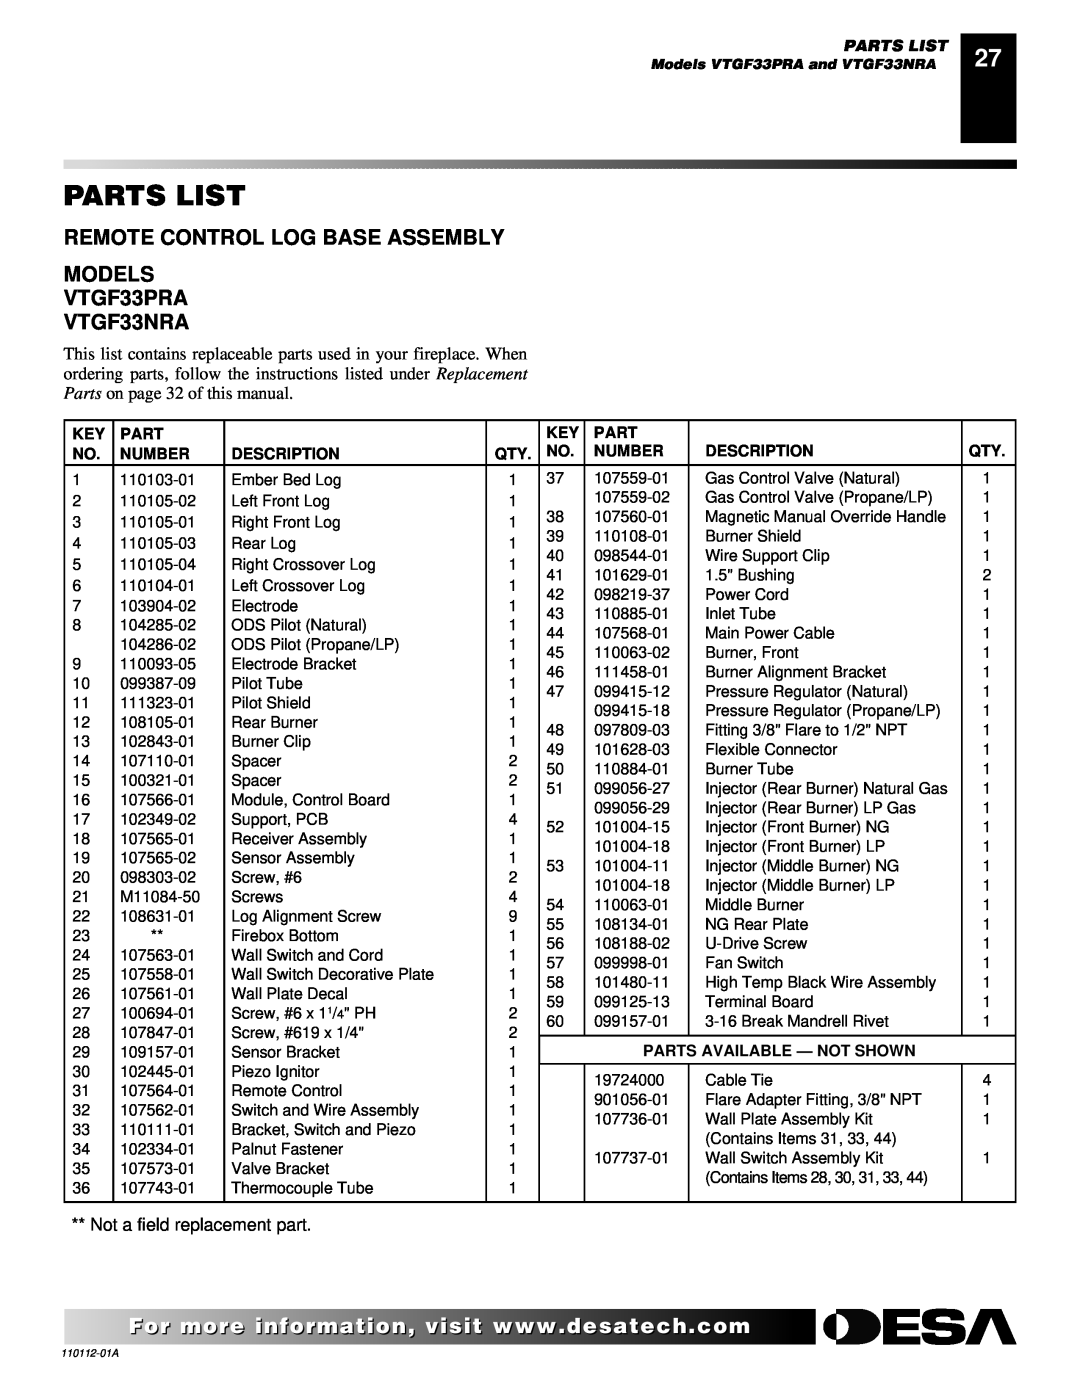 Desa Parts List, REMOTE CONTROL LOG BASE ASSEMBLY MODELS VTGF33PRA VTGF33NRA, Not a field replacement part, Number 